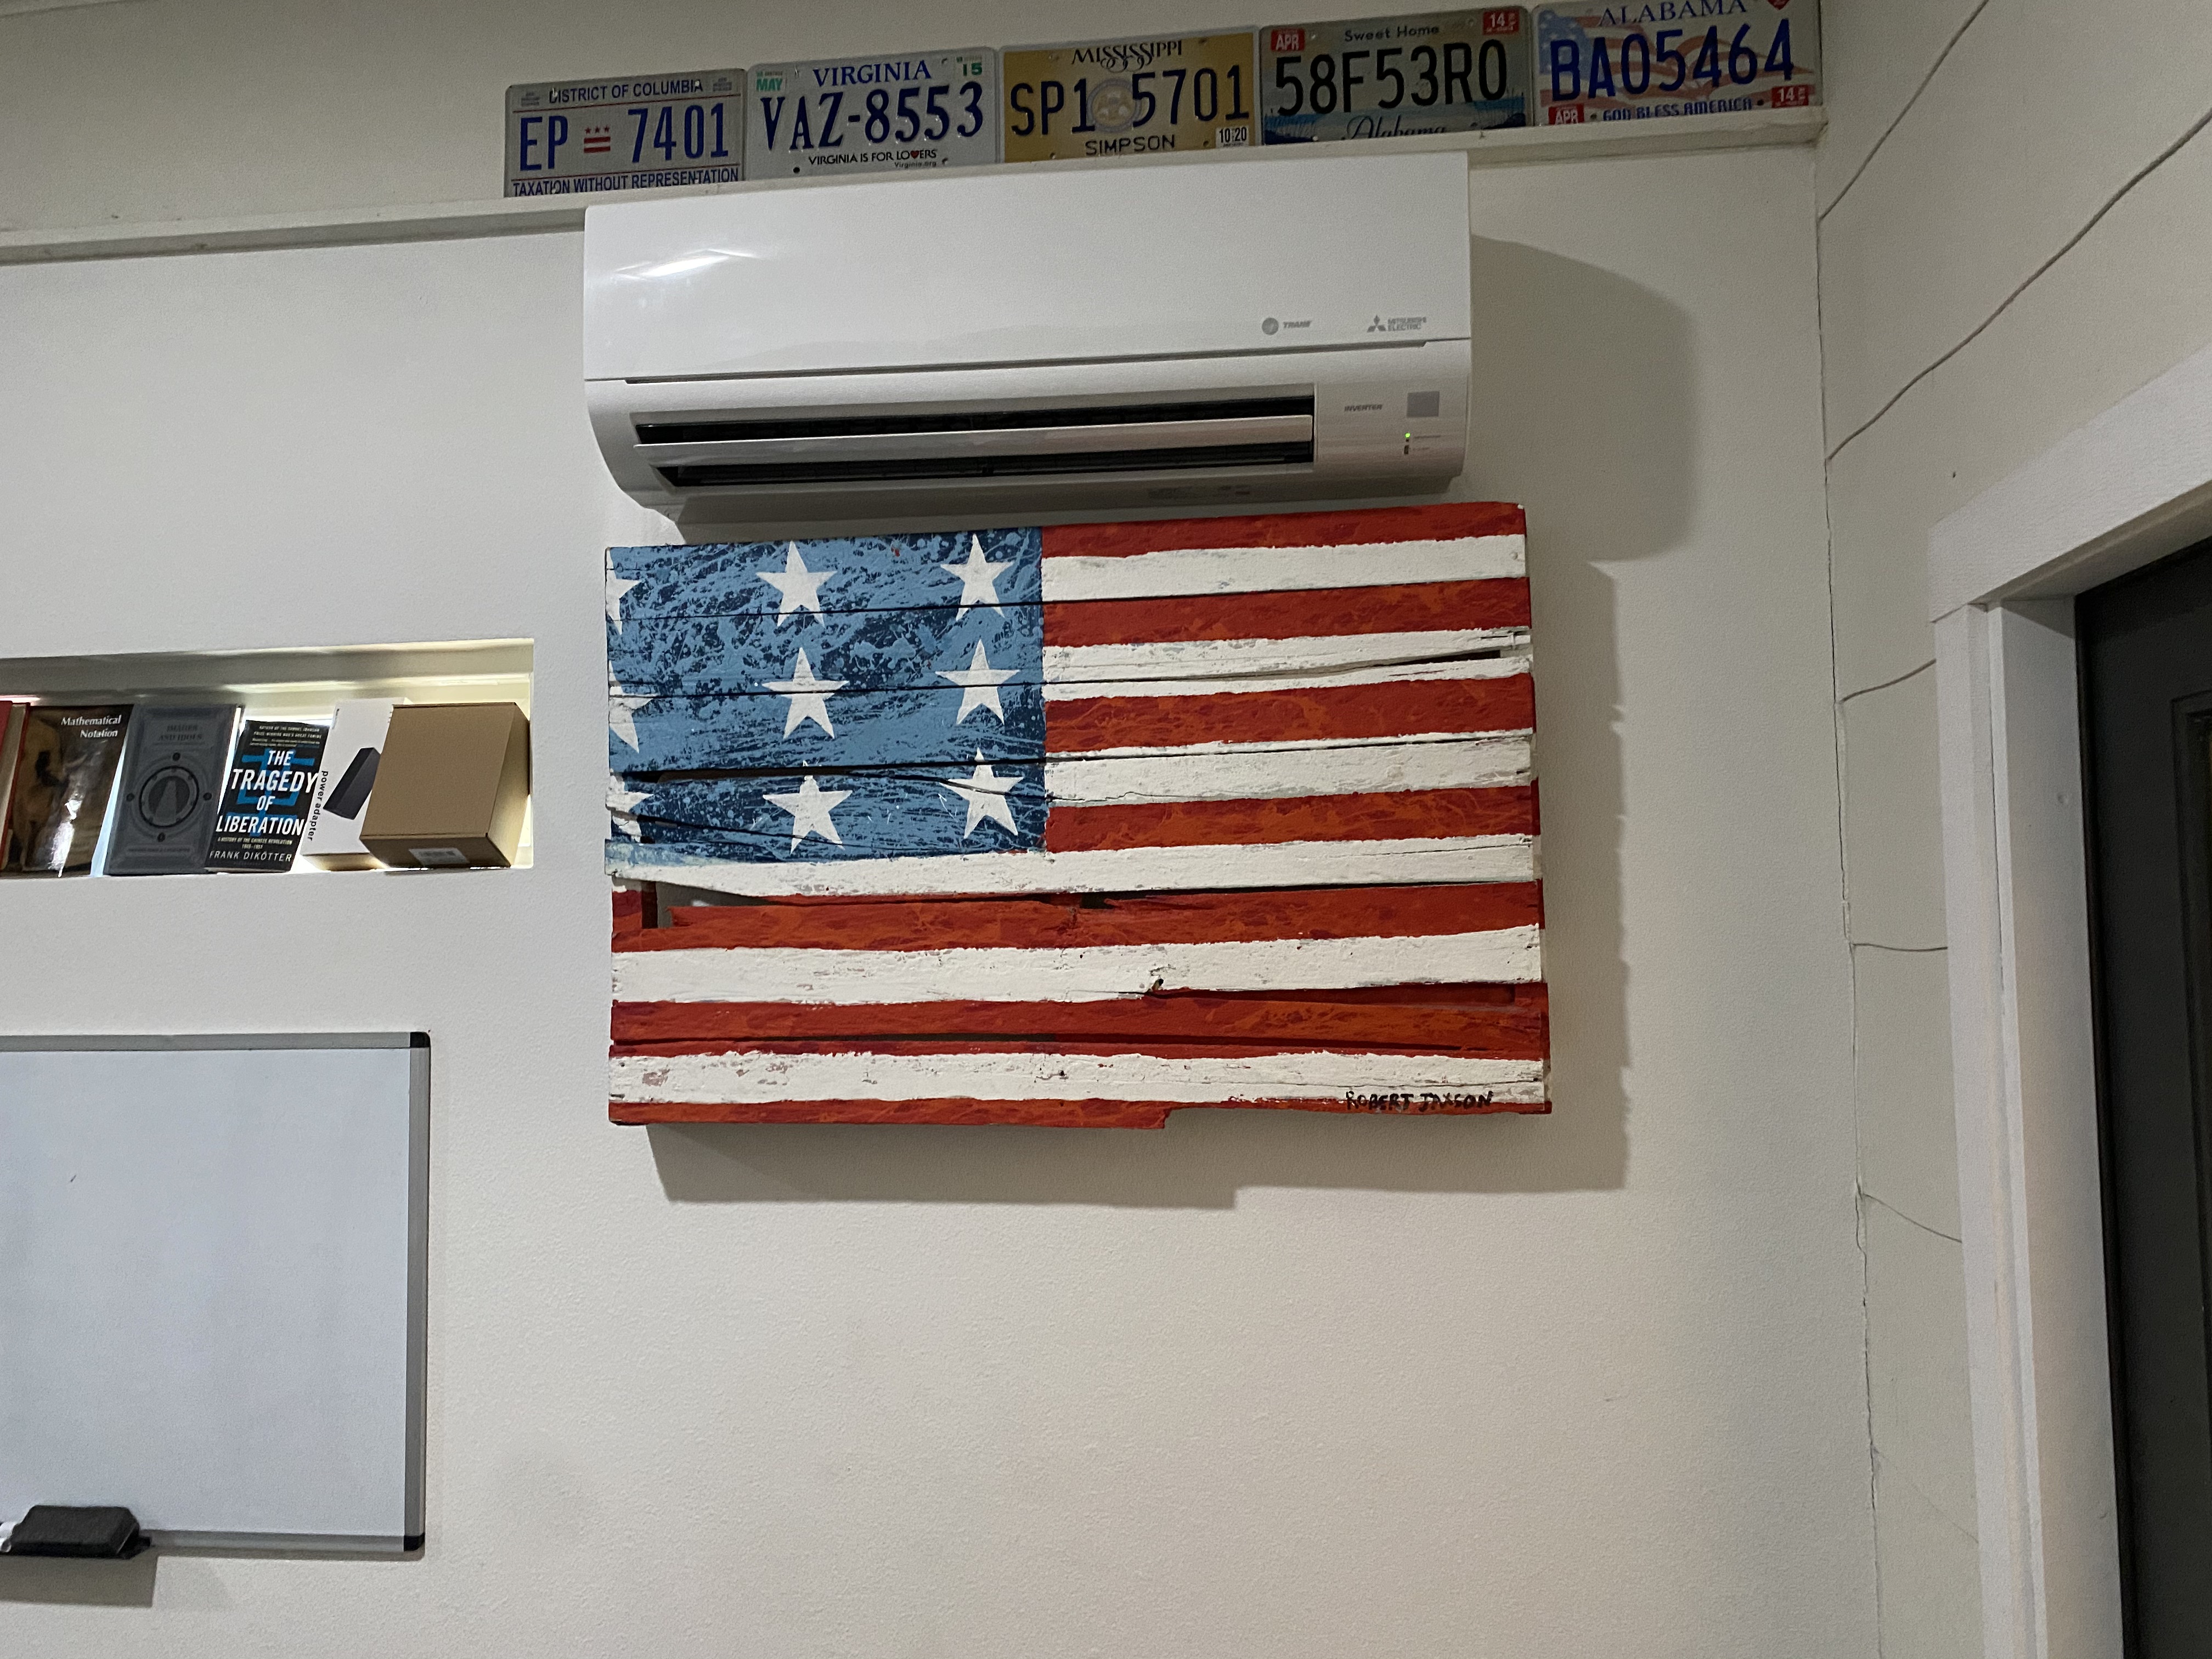 A ductless mini-split AC unit mounted to the wall, above an American flag painted on a wooden pallete.